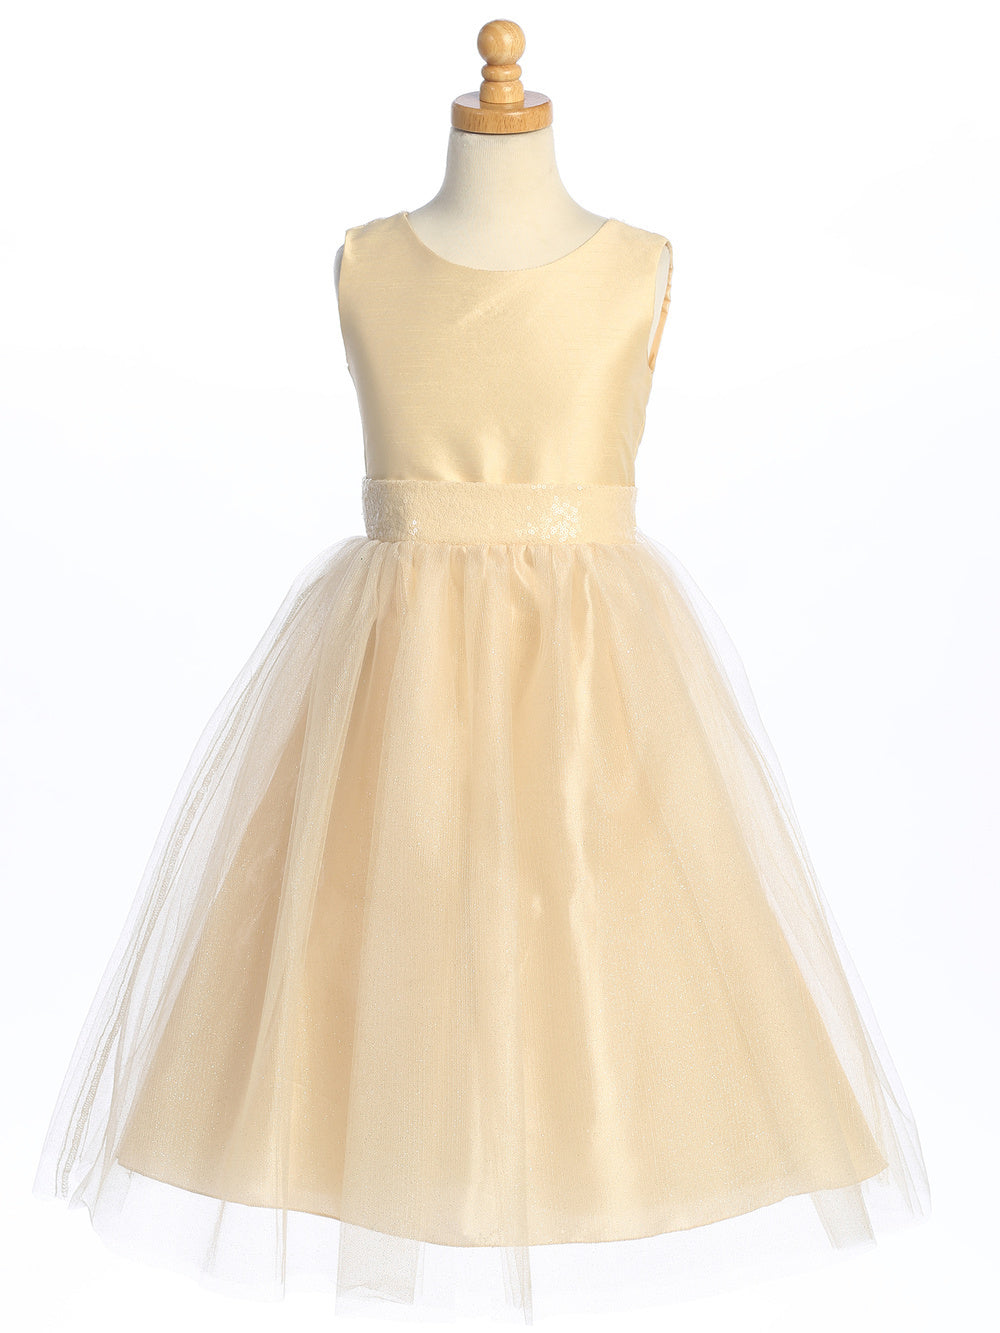 Champagne shantung dress with sparkle tulle and sequins, a fairy-tale for a flower girl.